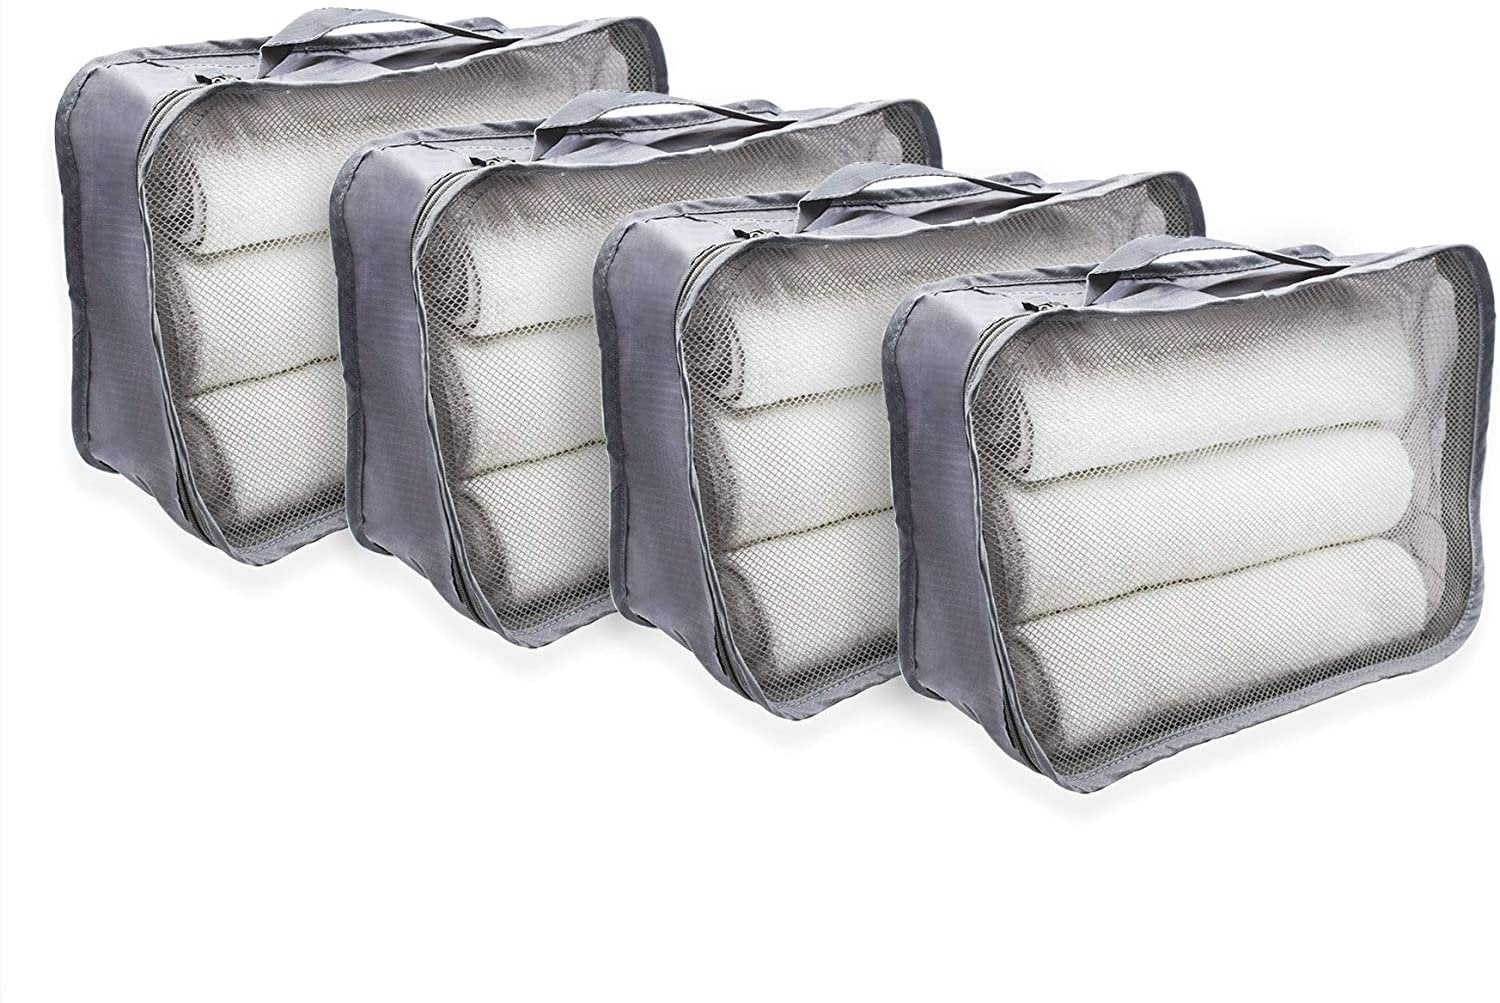 4 Pack Grey Packing Cubes for Travel, Medium Size, Ultralight Nylon Material - Free Shipping